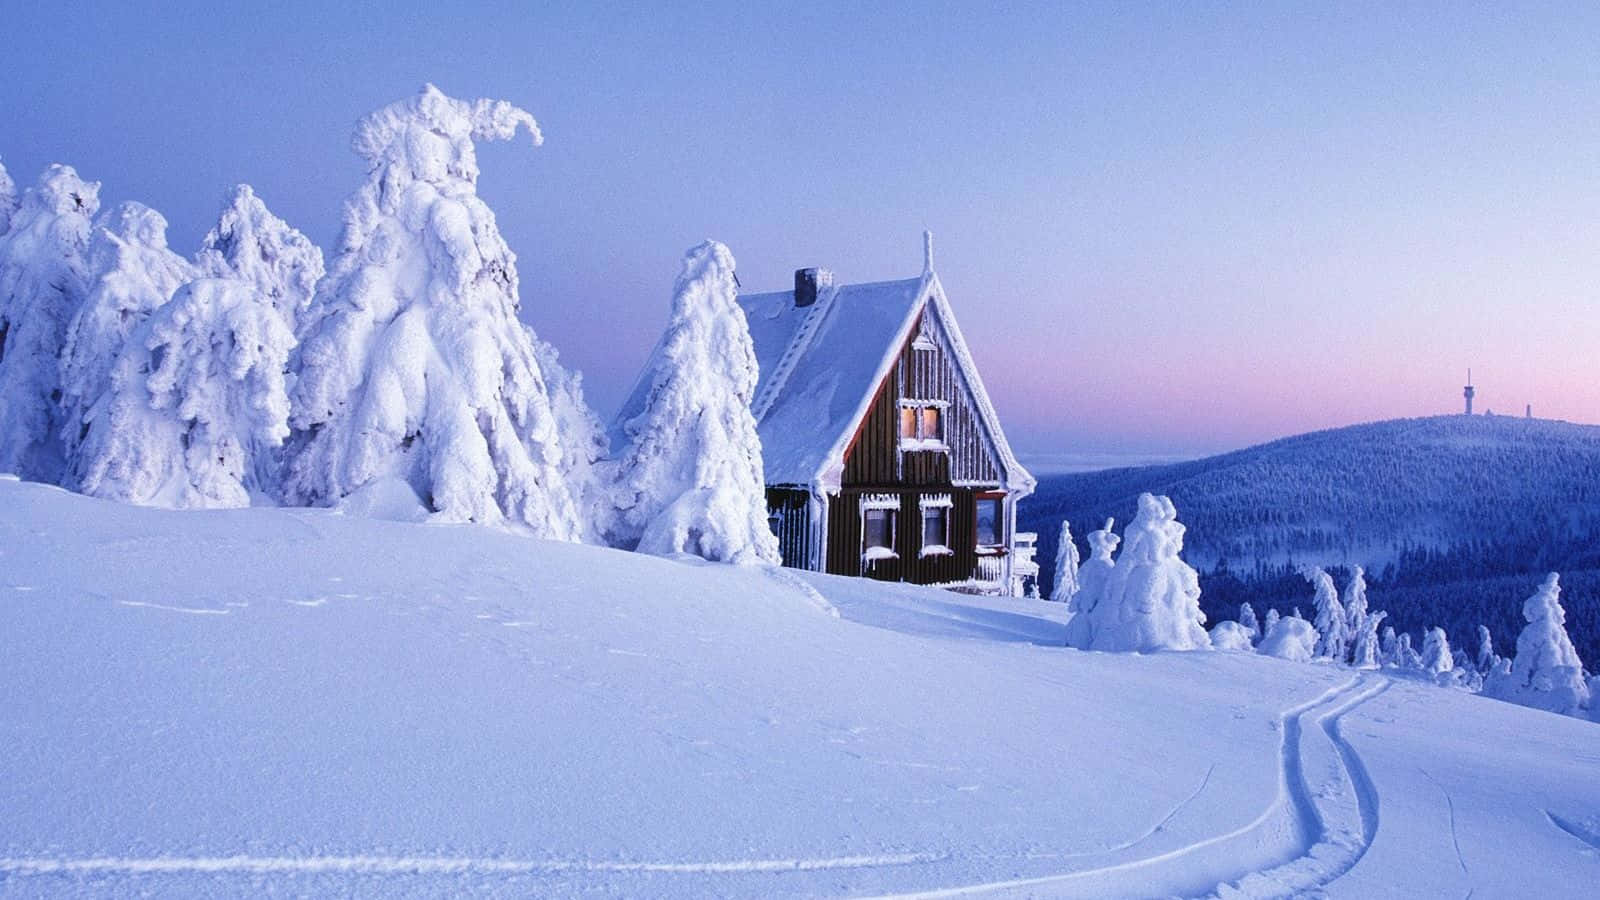 Picturing a perfect winter day in the mountains